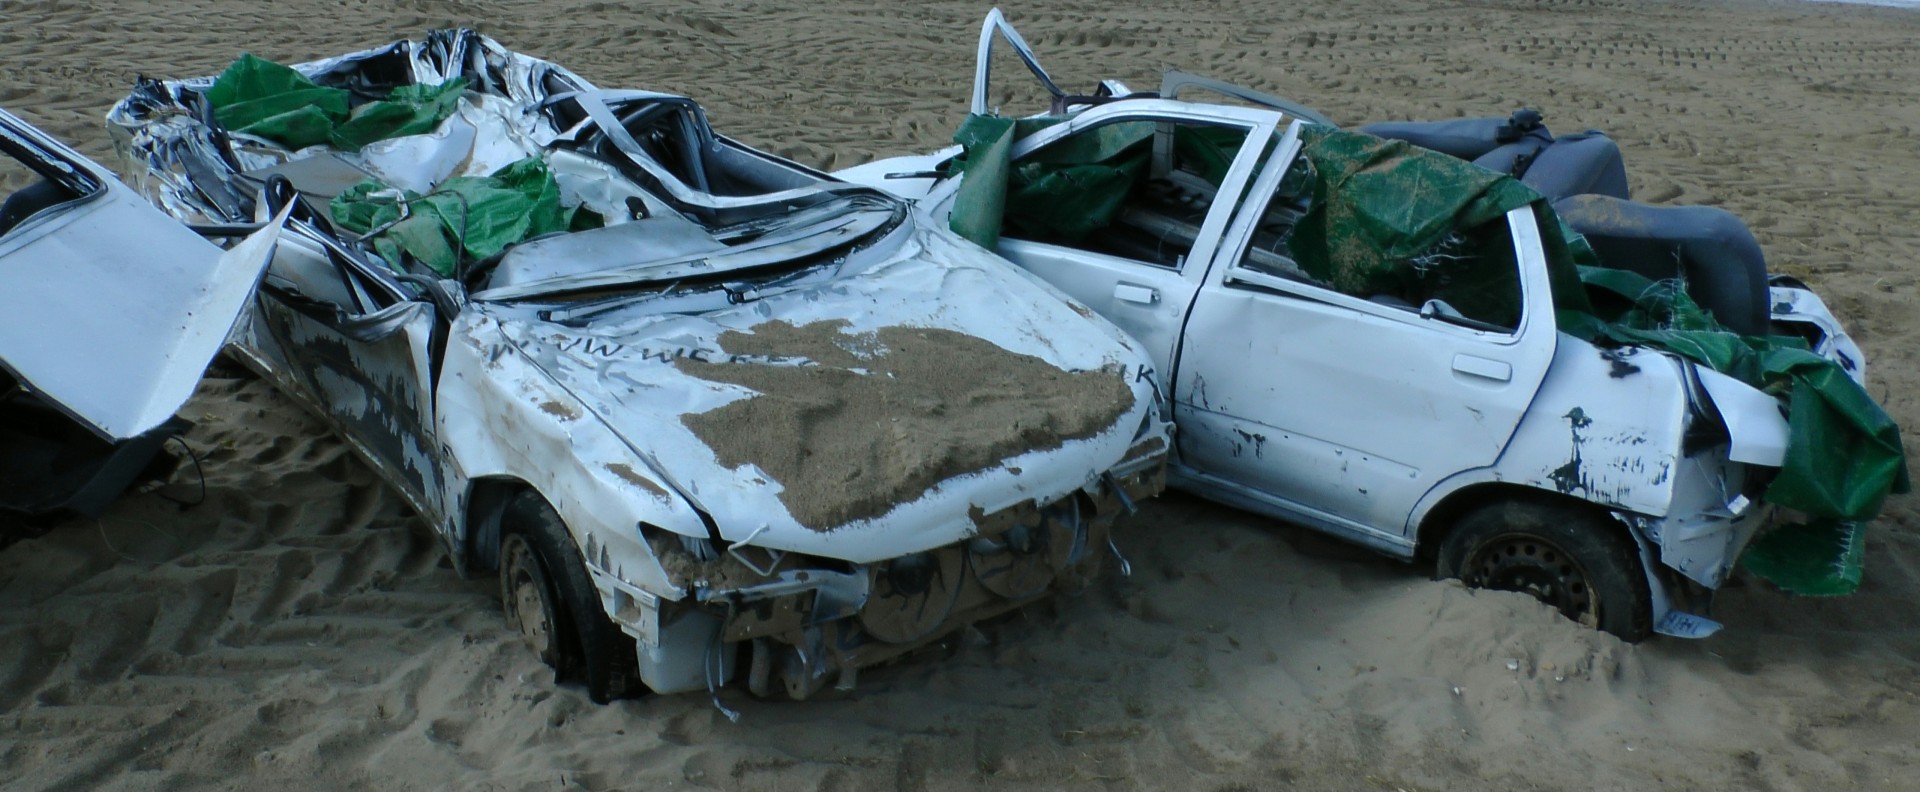 Two Wrecked Cars